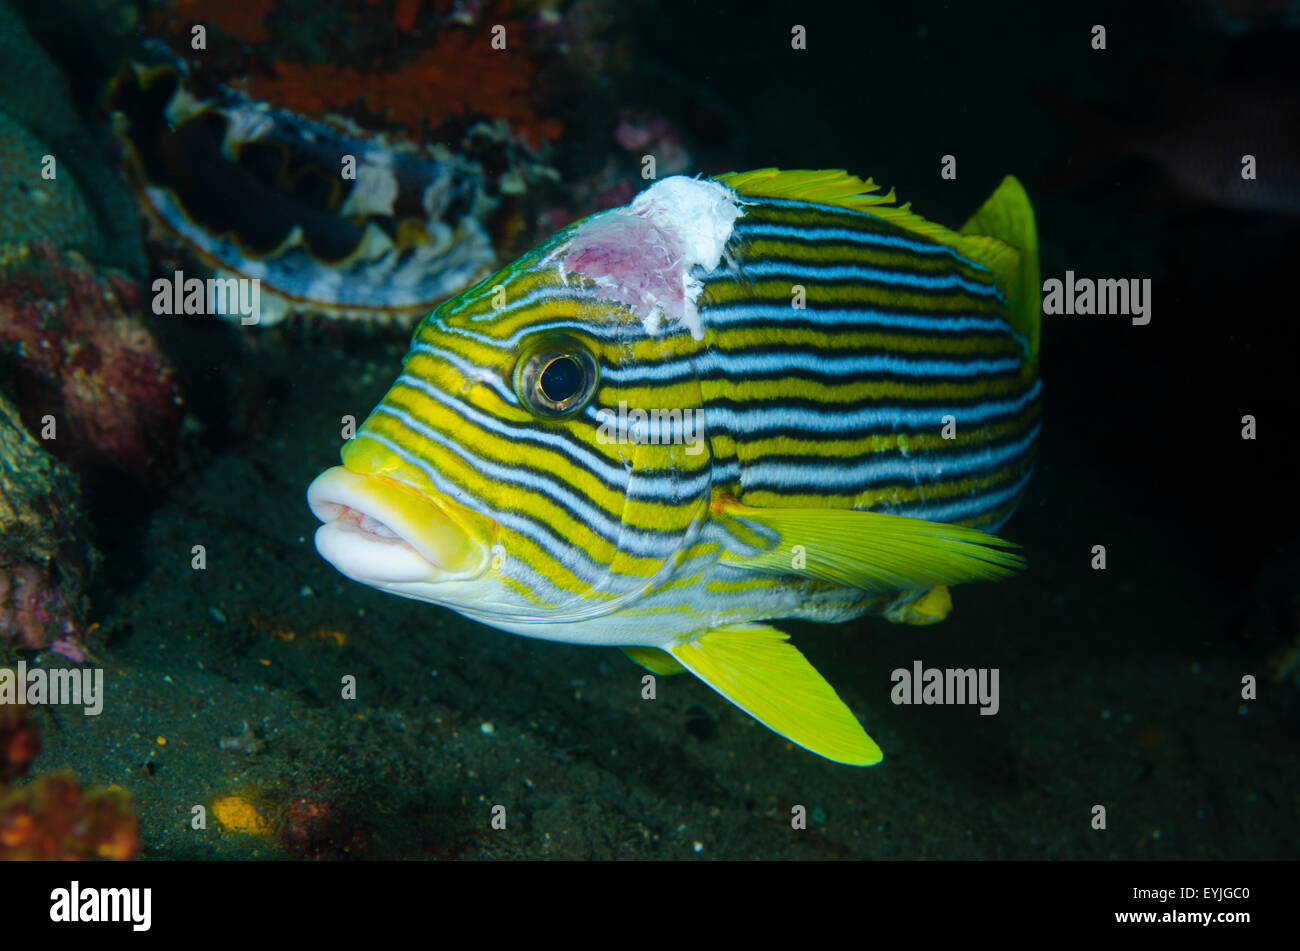 A Ribbon sweetlips, Plectorhinchus polytaenia, with a large open wound on its head, Amed, Bali, Indonesia Stock Photo